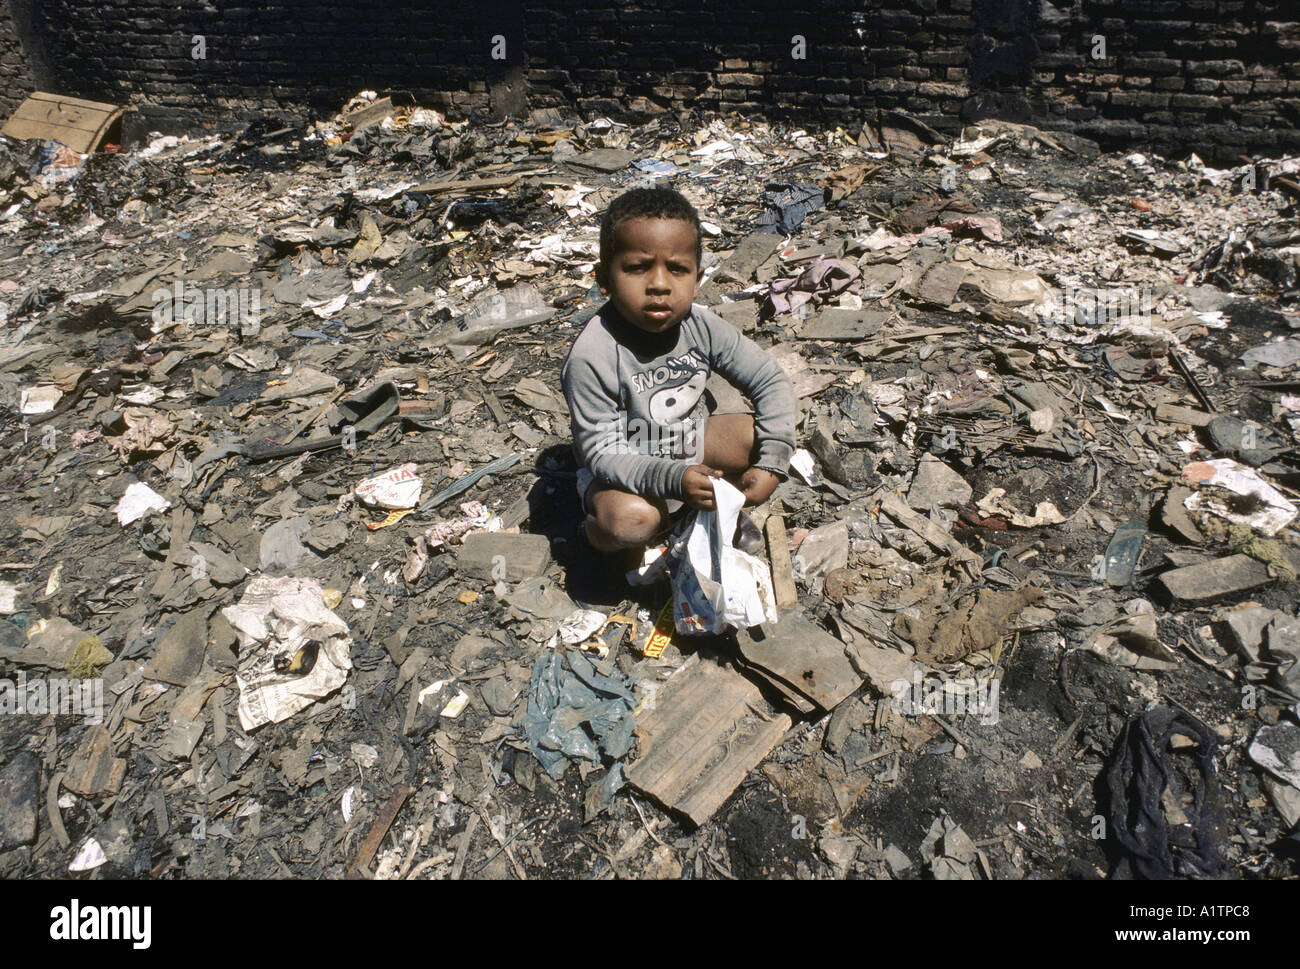 BRAZIL SAO PAULO SHANTY TOWN CHILD WEARING A SNOOPY SWEATER PLAYING IN RUBBISH Stock Photo